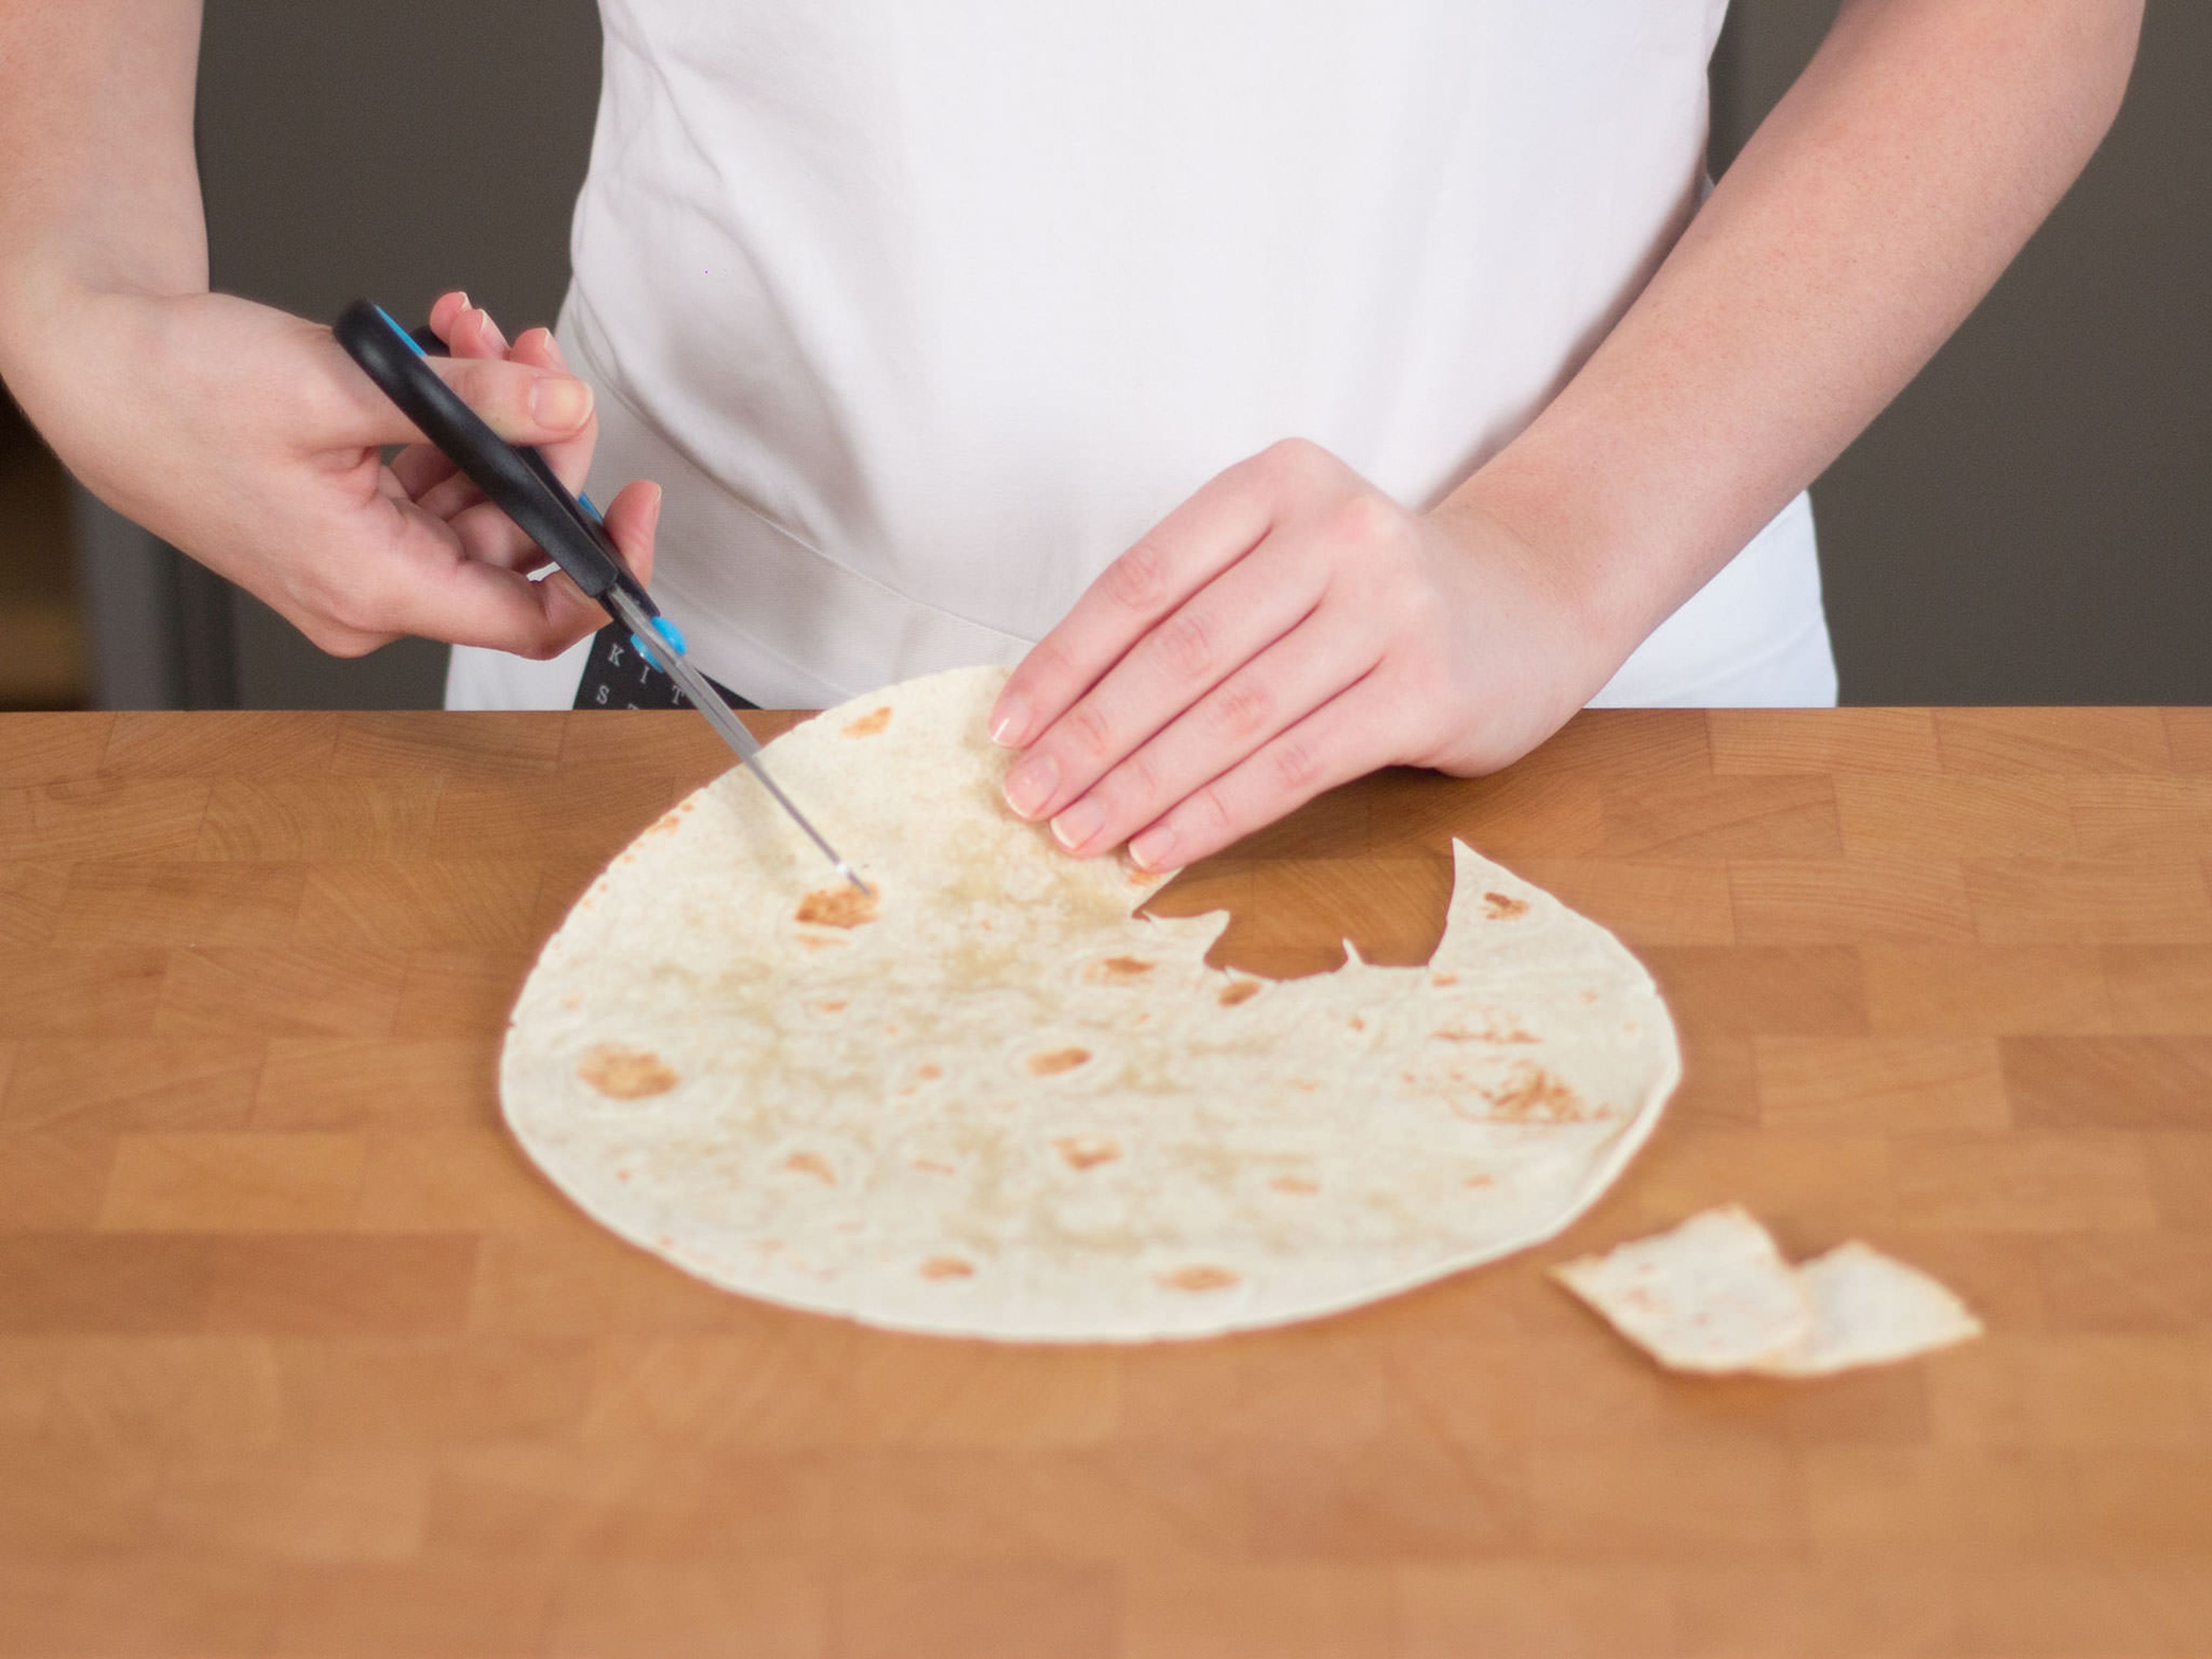 Using scissors, cut graveyard themed chips, such as headstones and ghosts, from tortillas. Place on a lined baking sheet, transfer to preheated oven, and bake at 150°C/300°F for approx. 10 – 15 min. until golden brown.